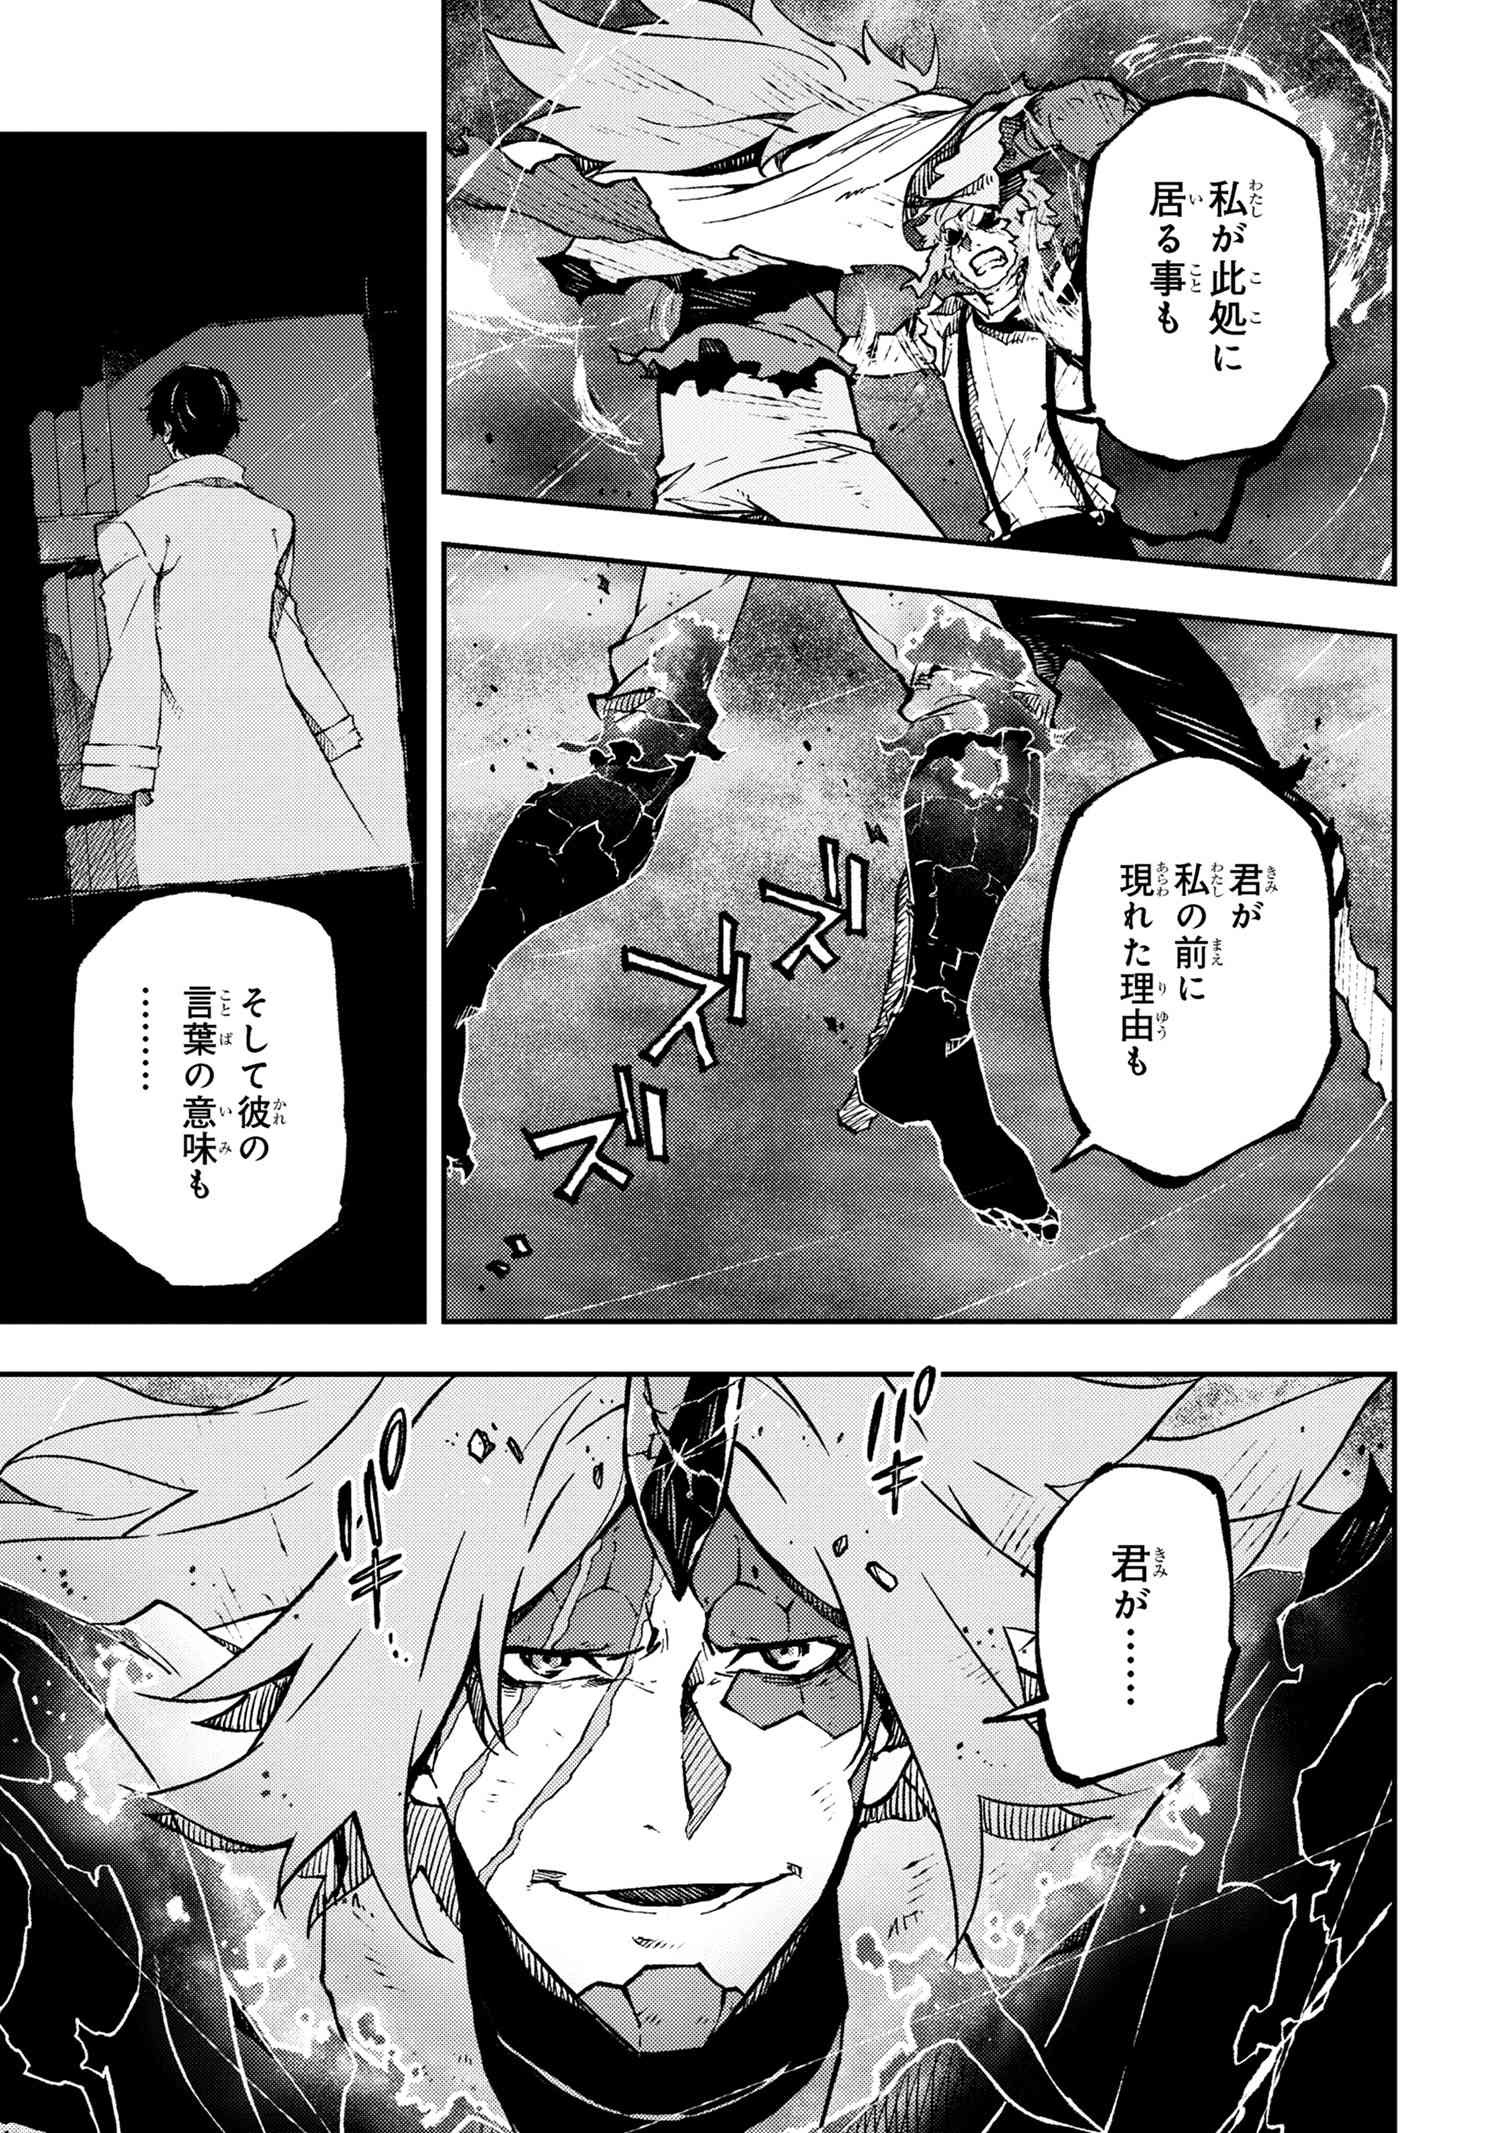 Bungou Stray Dogs: Dead Apple - Chapter 15-4 - Page 10